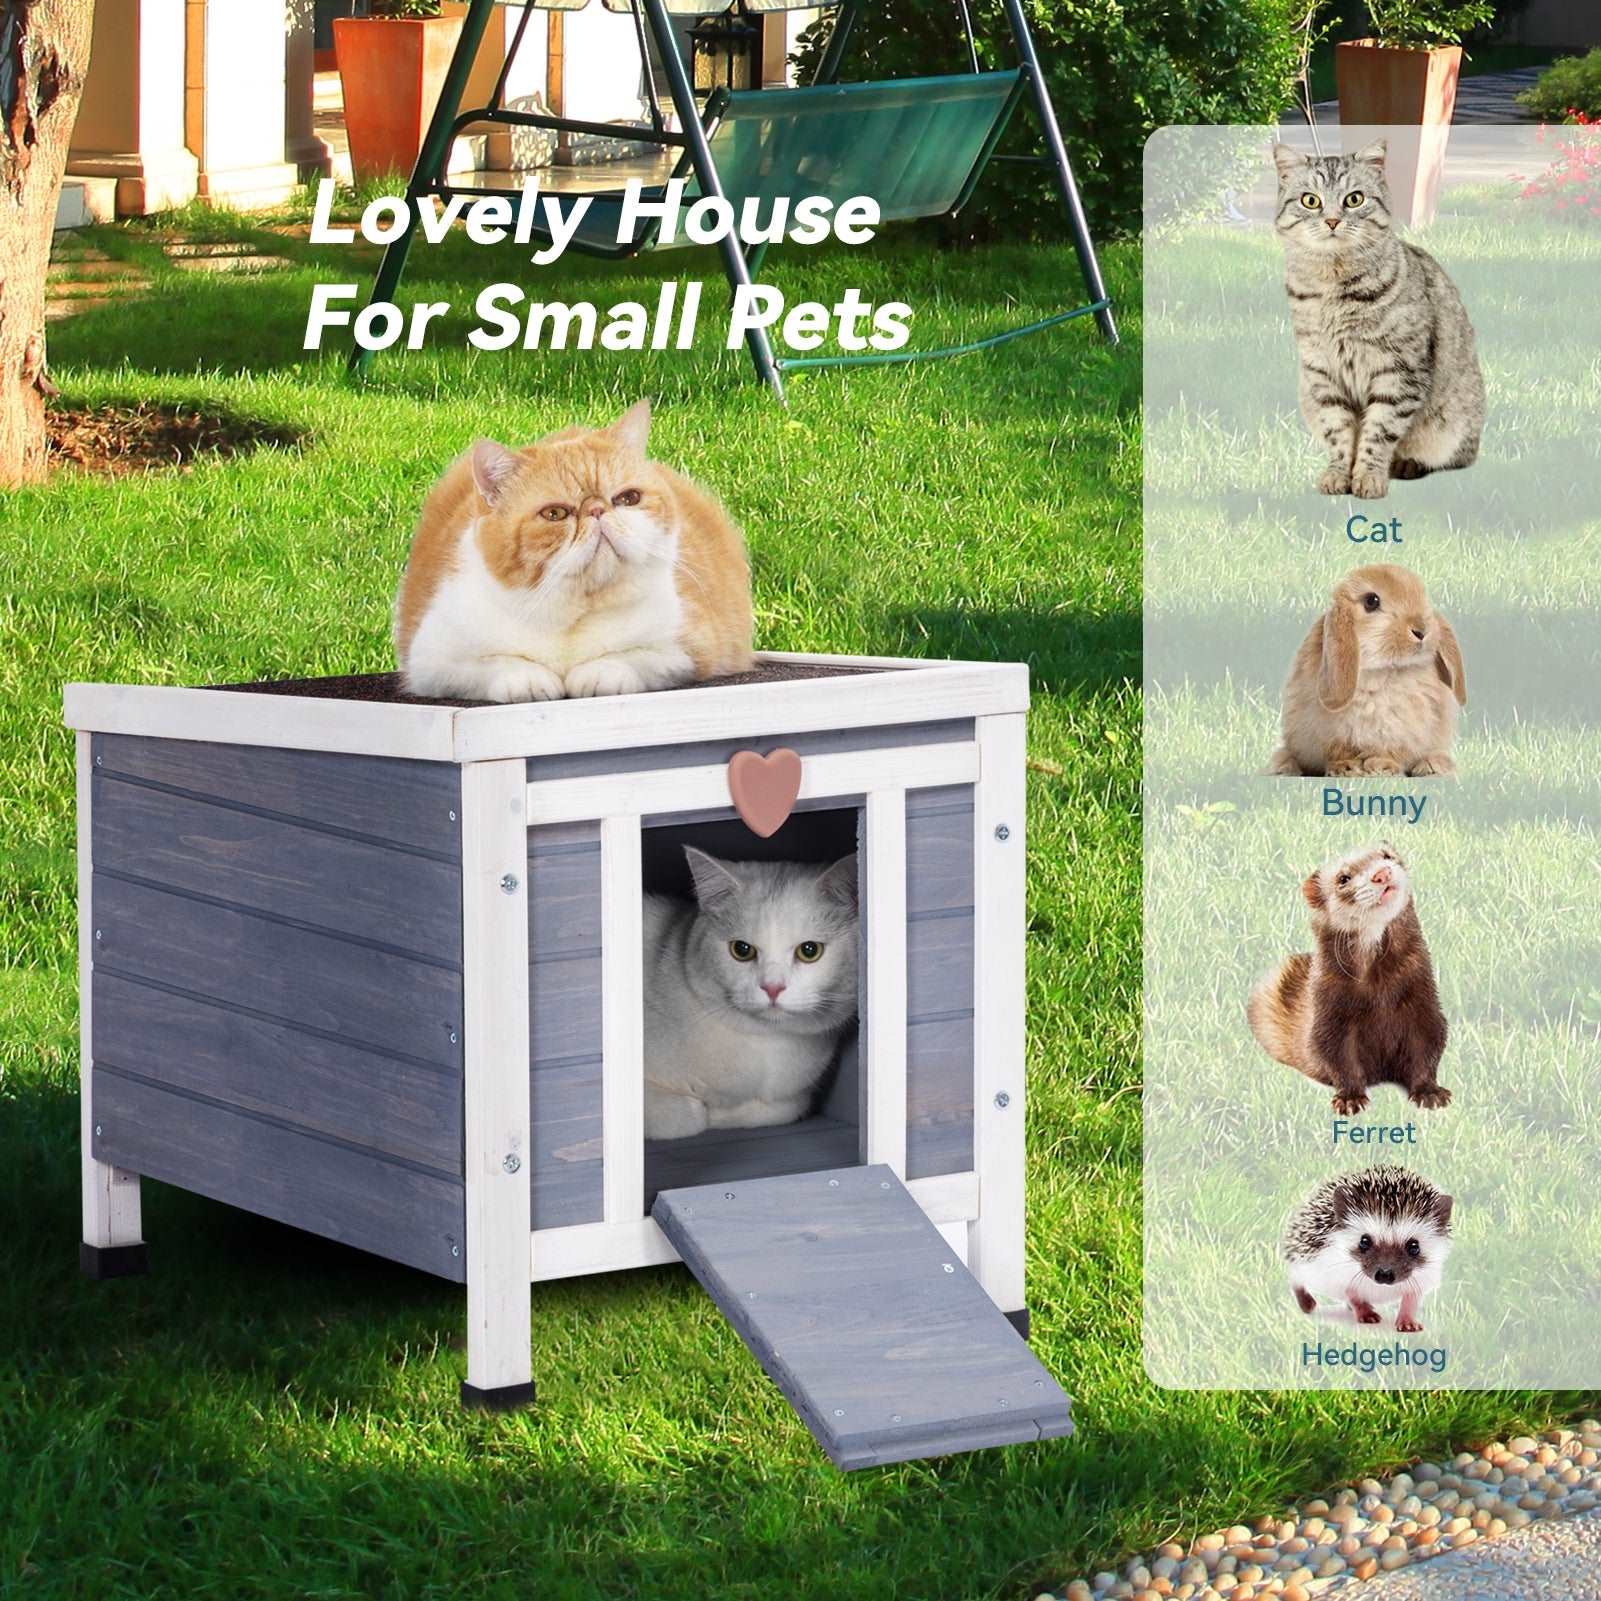 Outdoor-Cat-House-Higher-Feet-to-Against-Rain-and-Snow-07